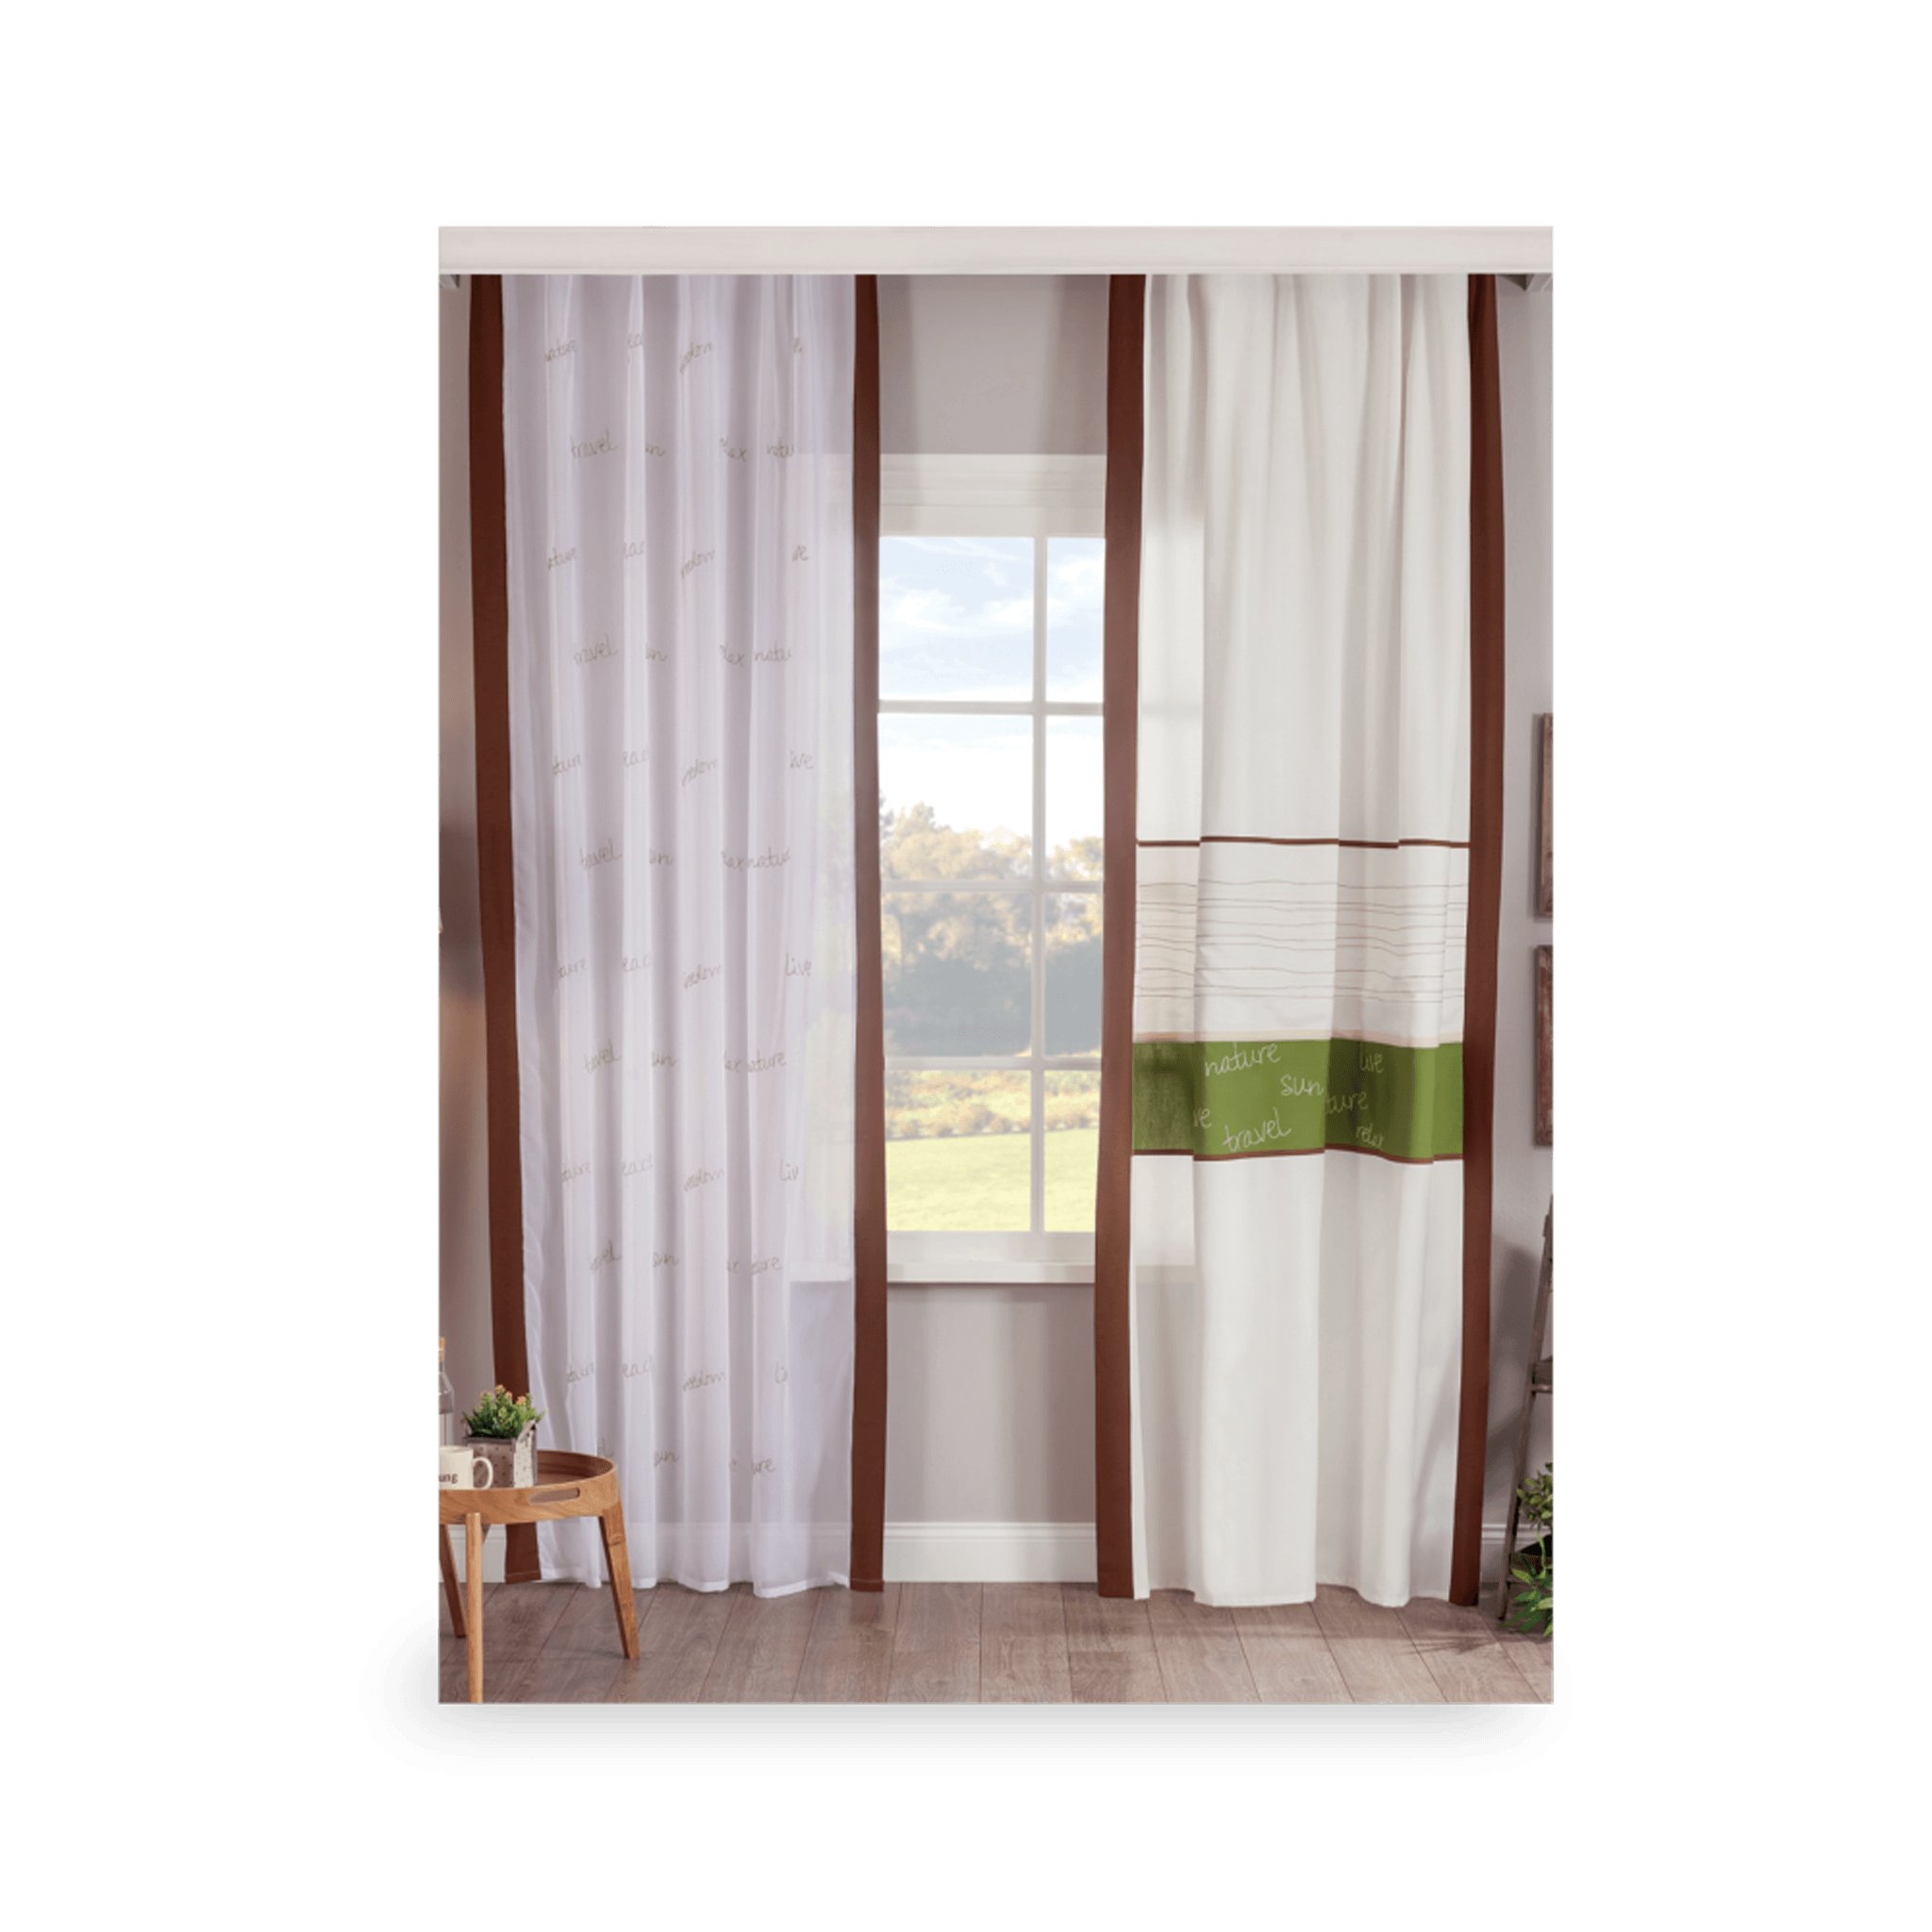 Cilek Cool Curtain (160X260 Cm) And/Or Cool Sheers (160X260 Cm)